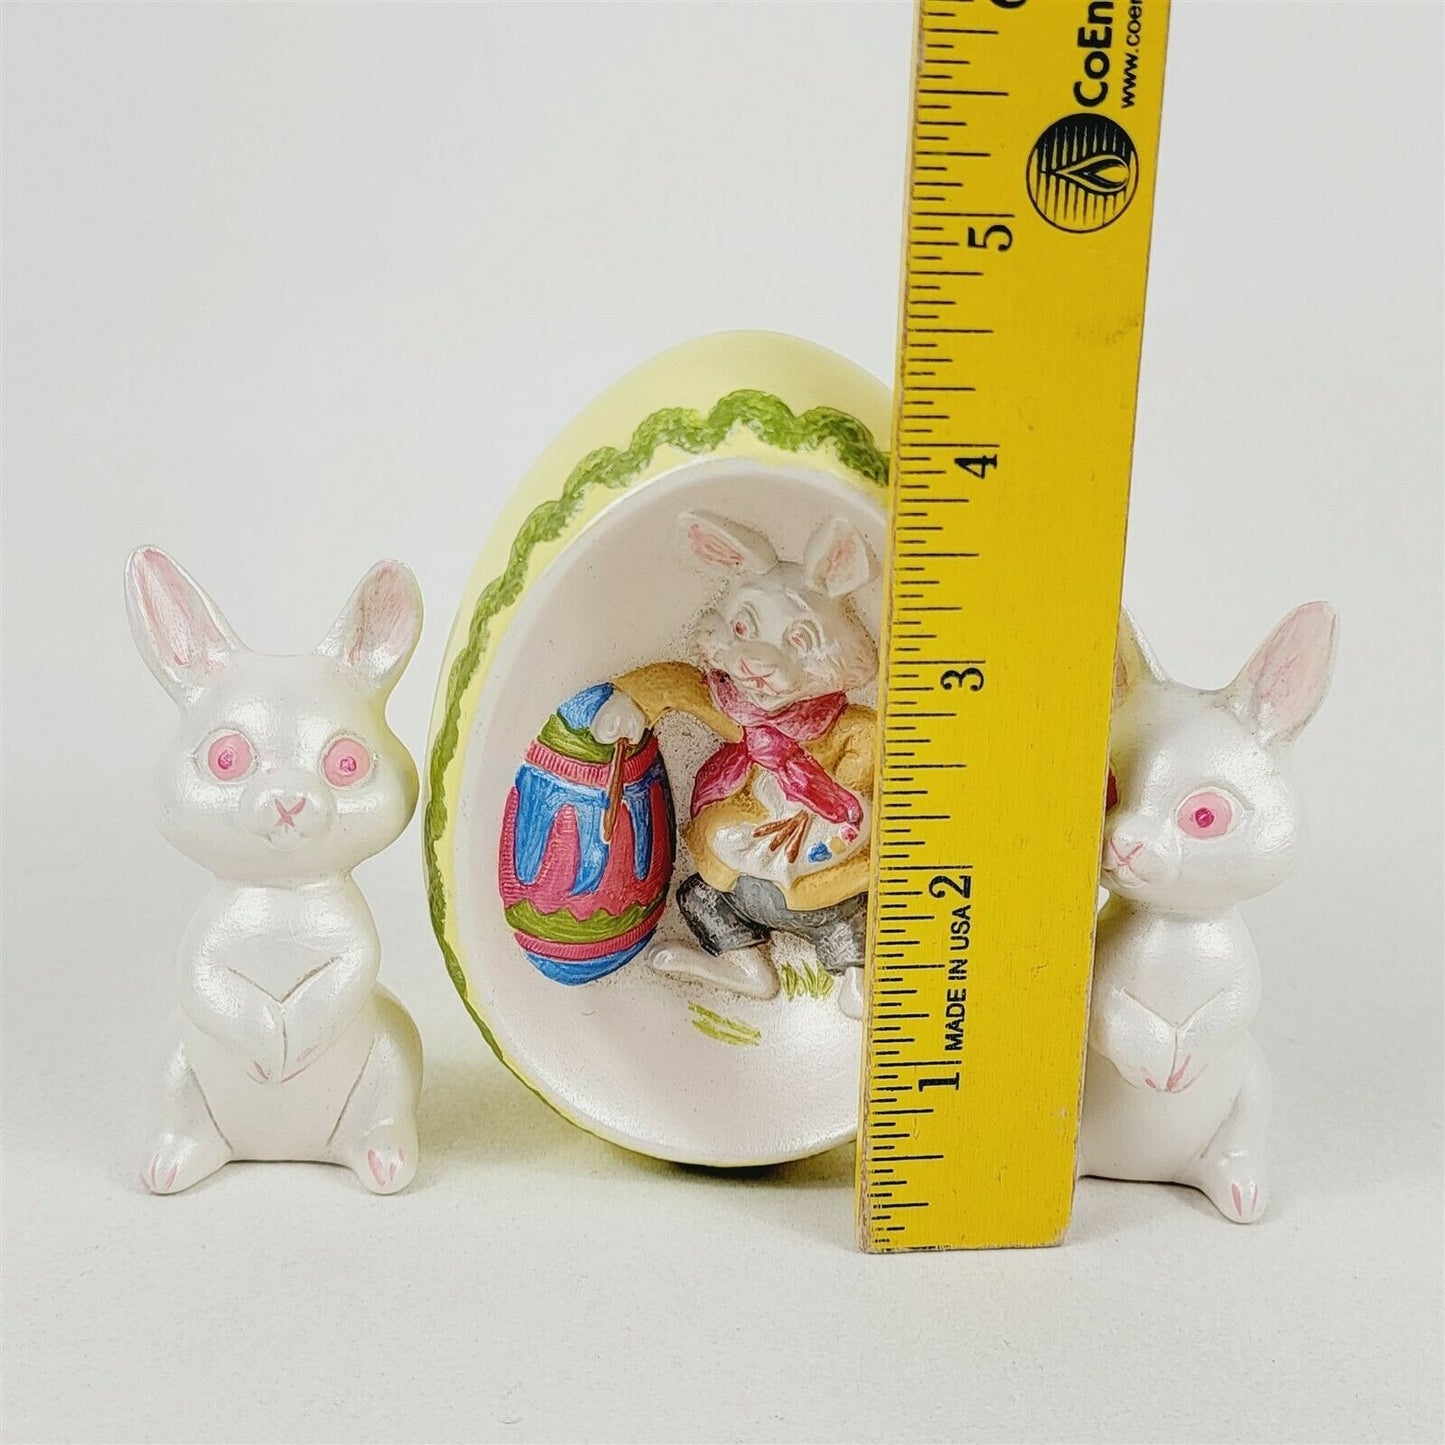 Vintage 1970s Hand Painted Ceramic Mold Mini Easter Bunny Egg Painting Decor